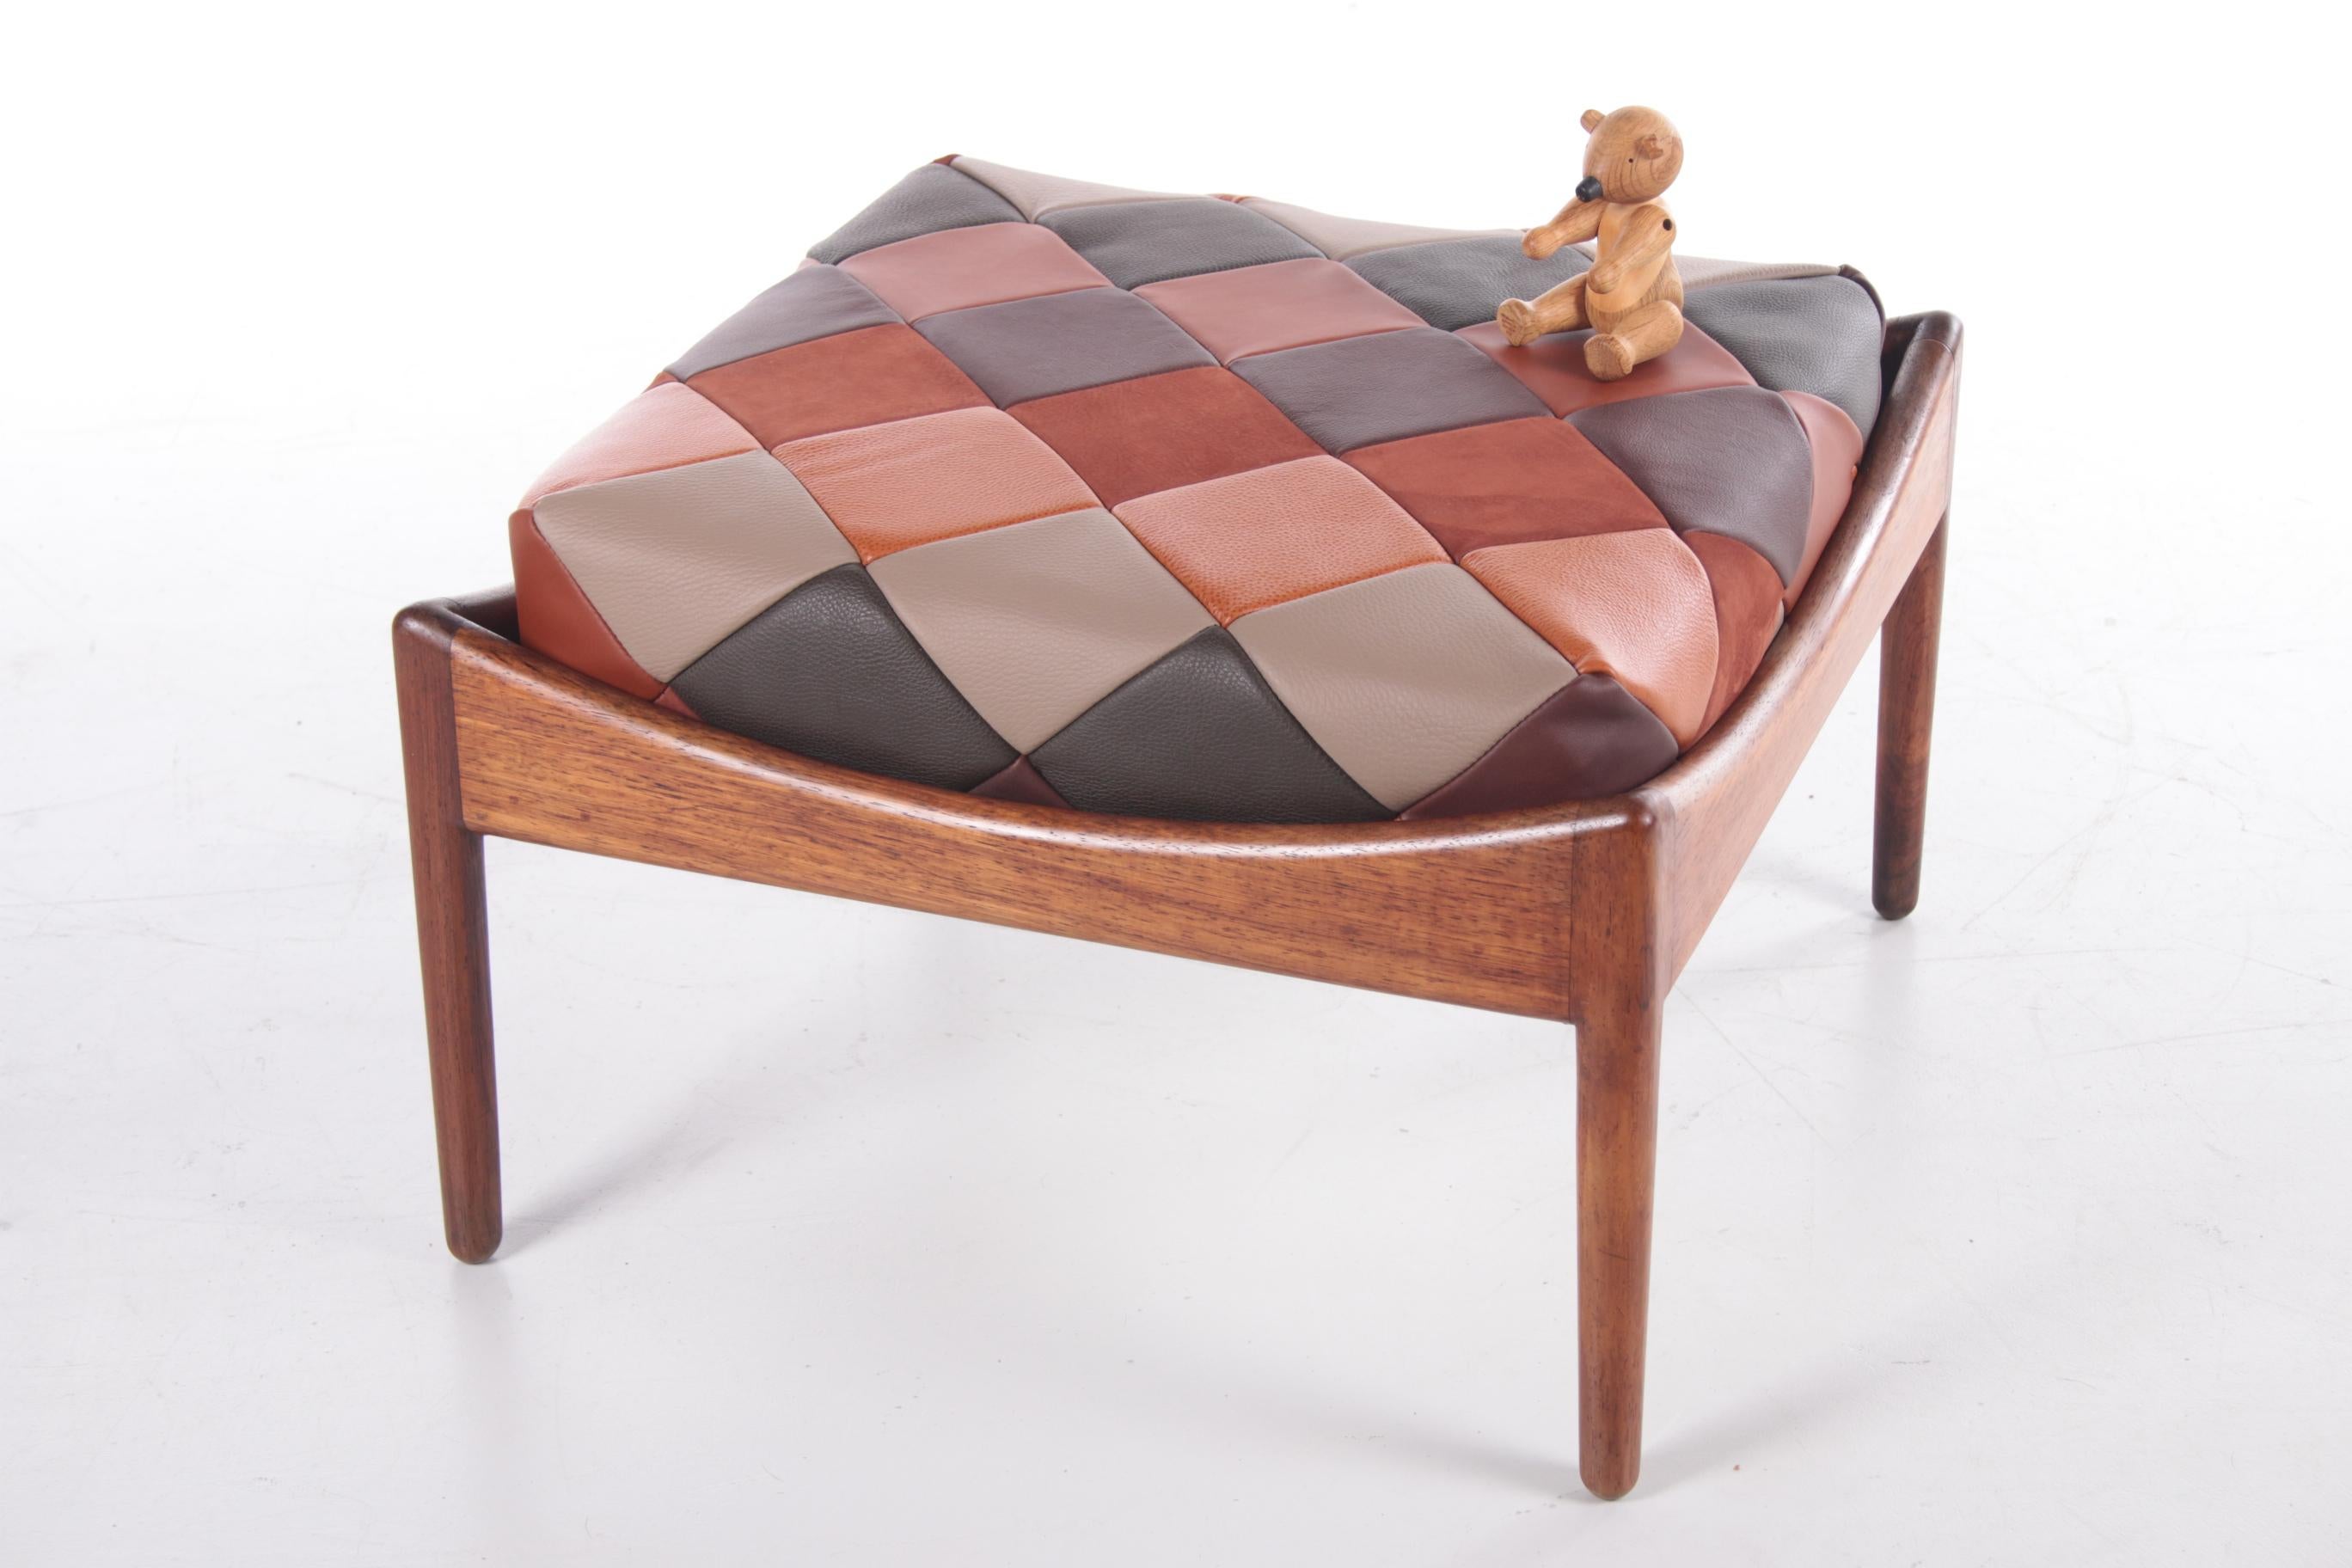 Leather footstool designed by Kristian Solmer Vedel for Søren Willadsen Møbelfabrik in 1963. The stool has a teak wooden frame and a seat of leather in different shades. 

Considering its age this hocker is in very good condition, the cushion is